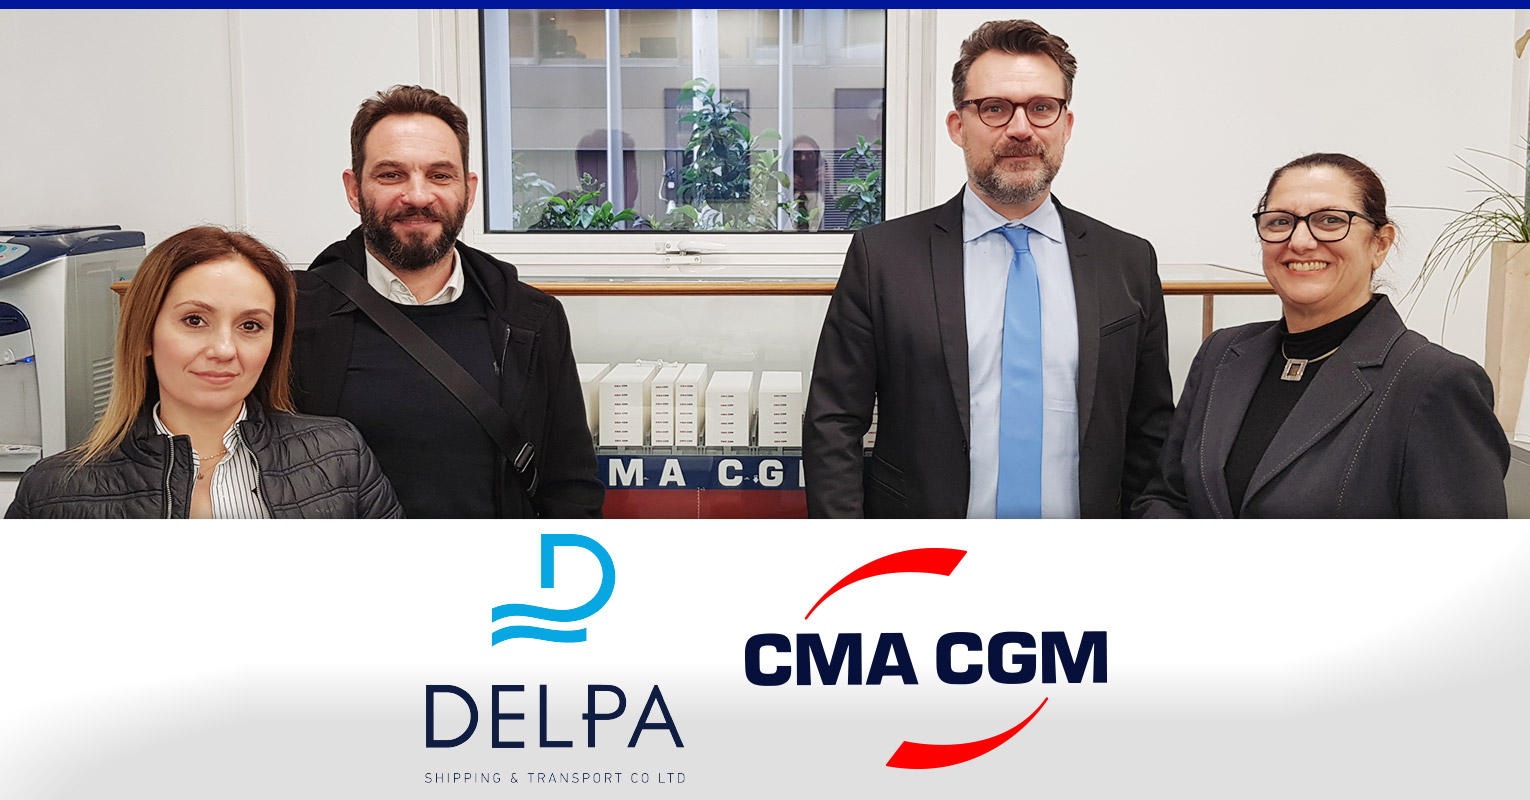 Delpa Shipping & Transport Co. Ltd. met with CMA CGM at their Piraeus office